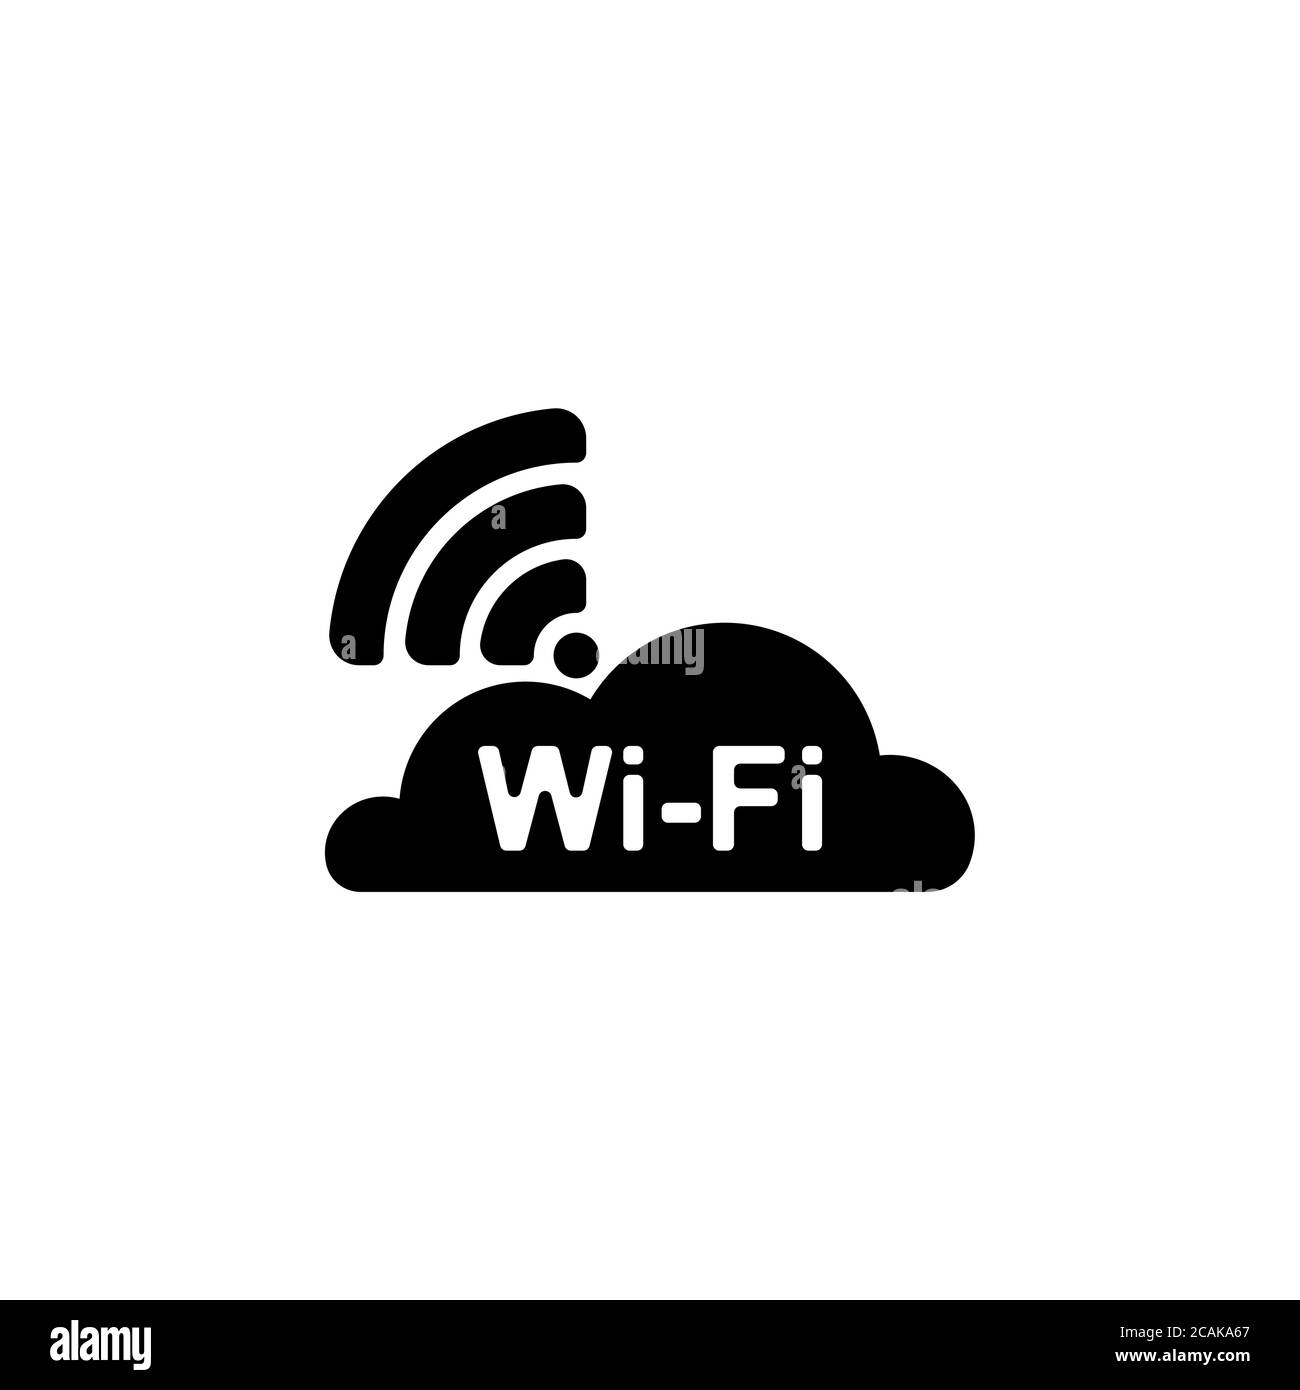 cloud wifi vector icon. Network, WiFi and wireless sign. Wifi zone symbol. WiFi simple logo black on white. Stock Vector